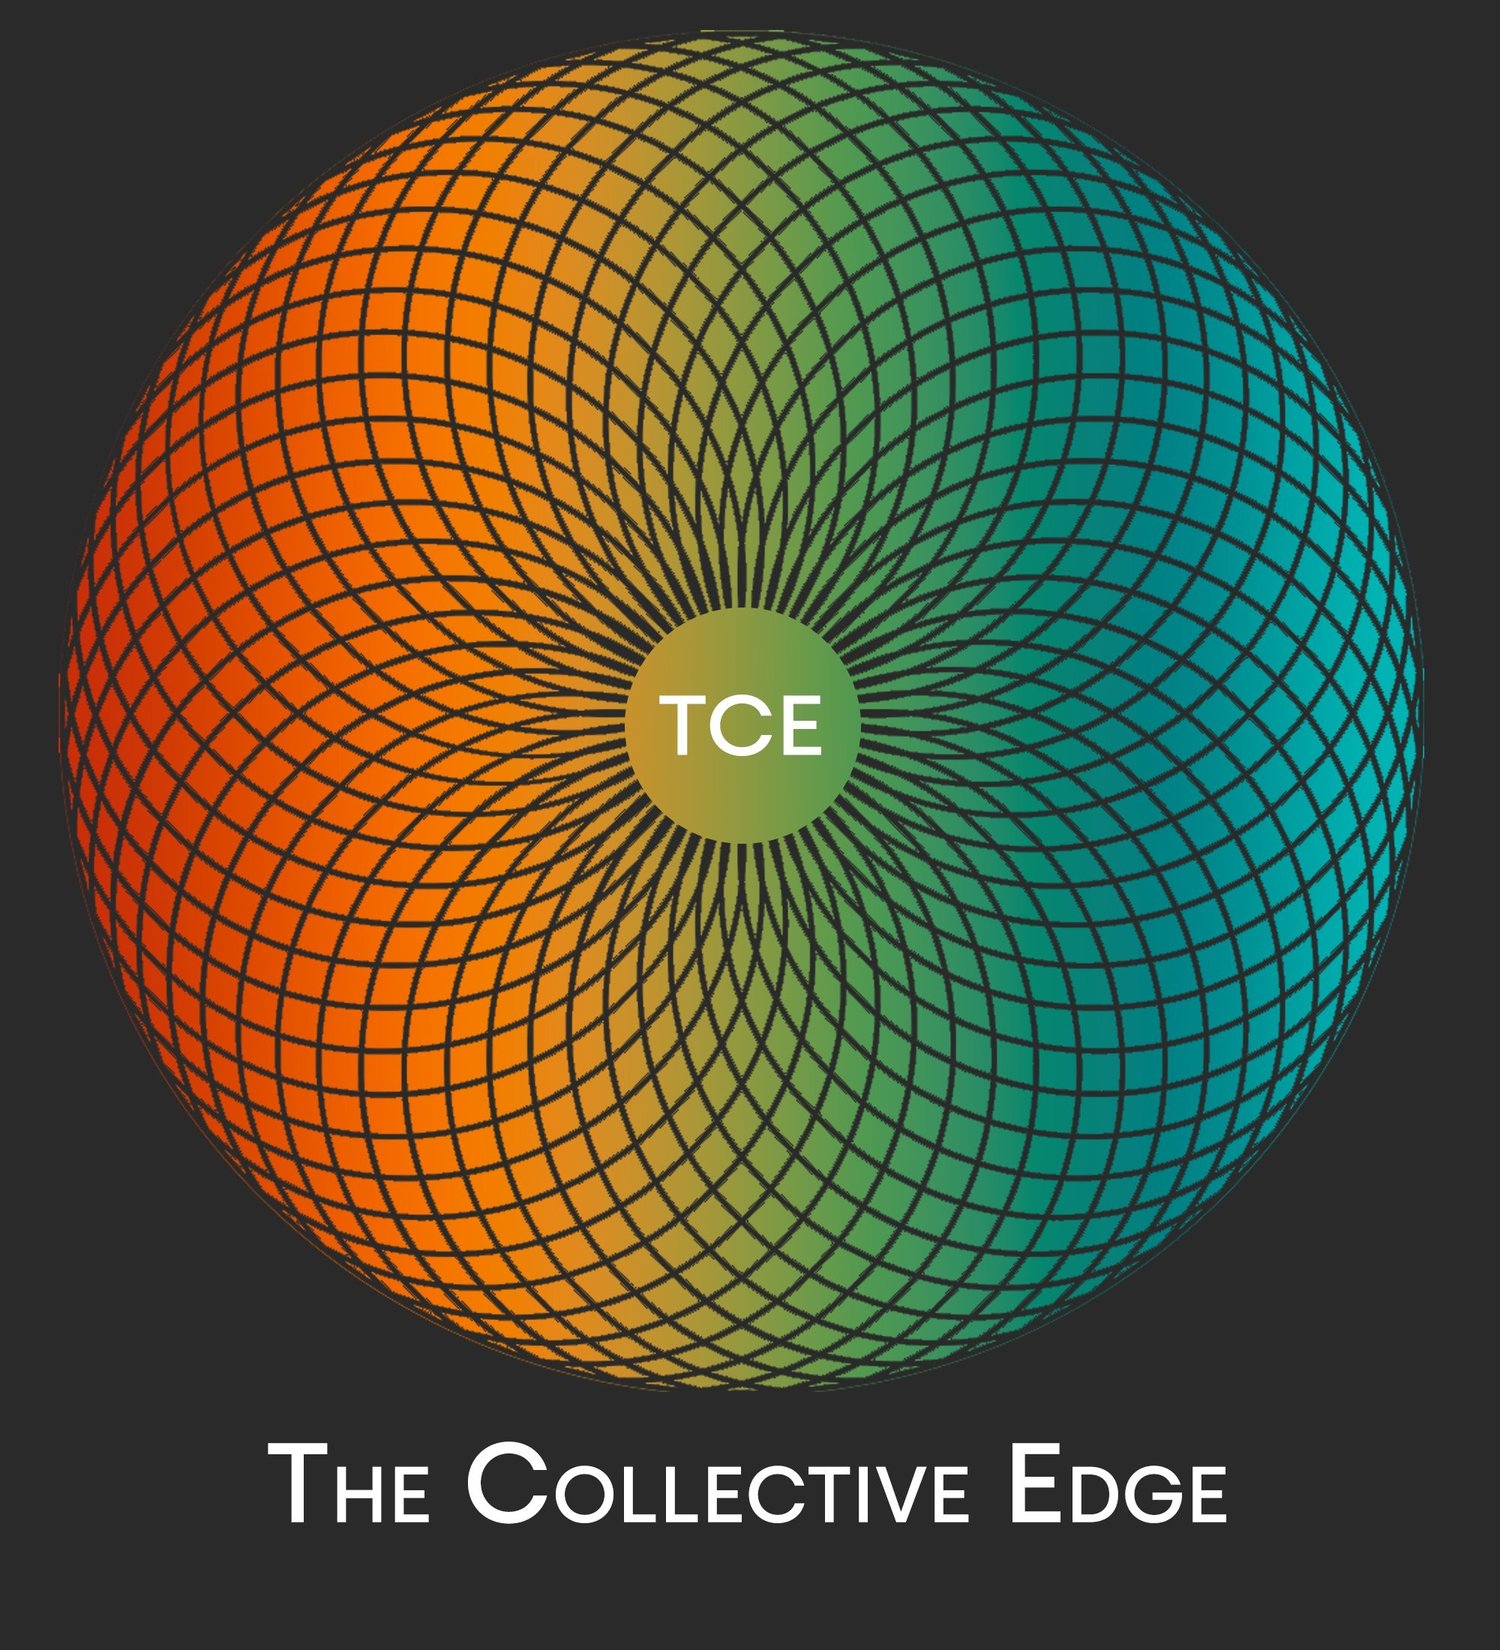 The Collective Edge